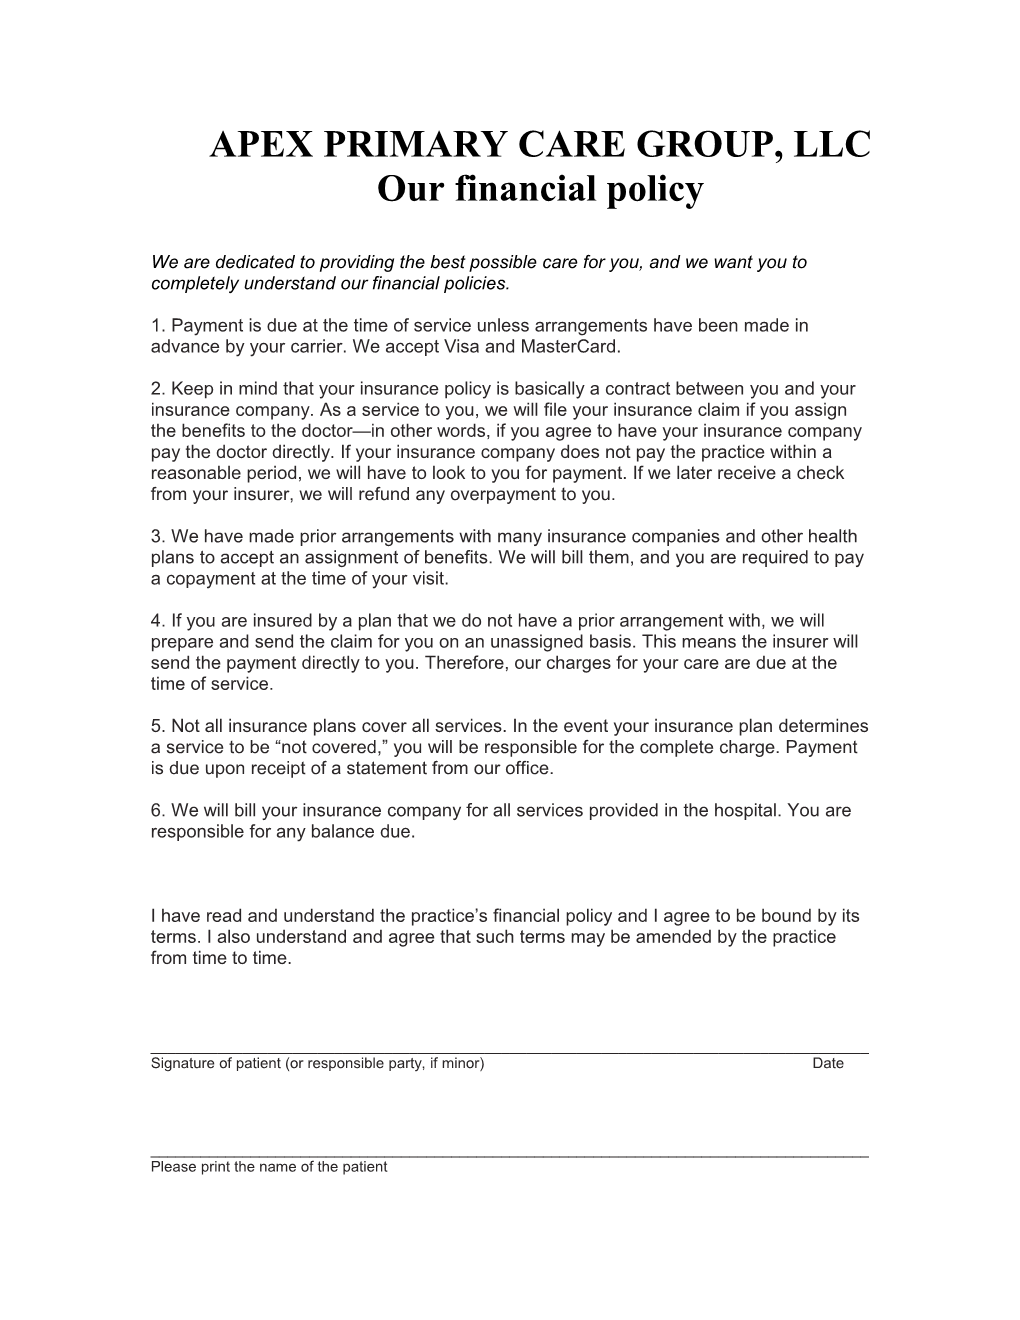 Our Financial Policy